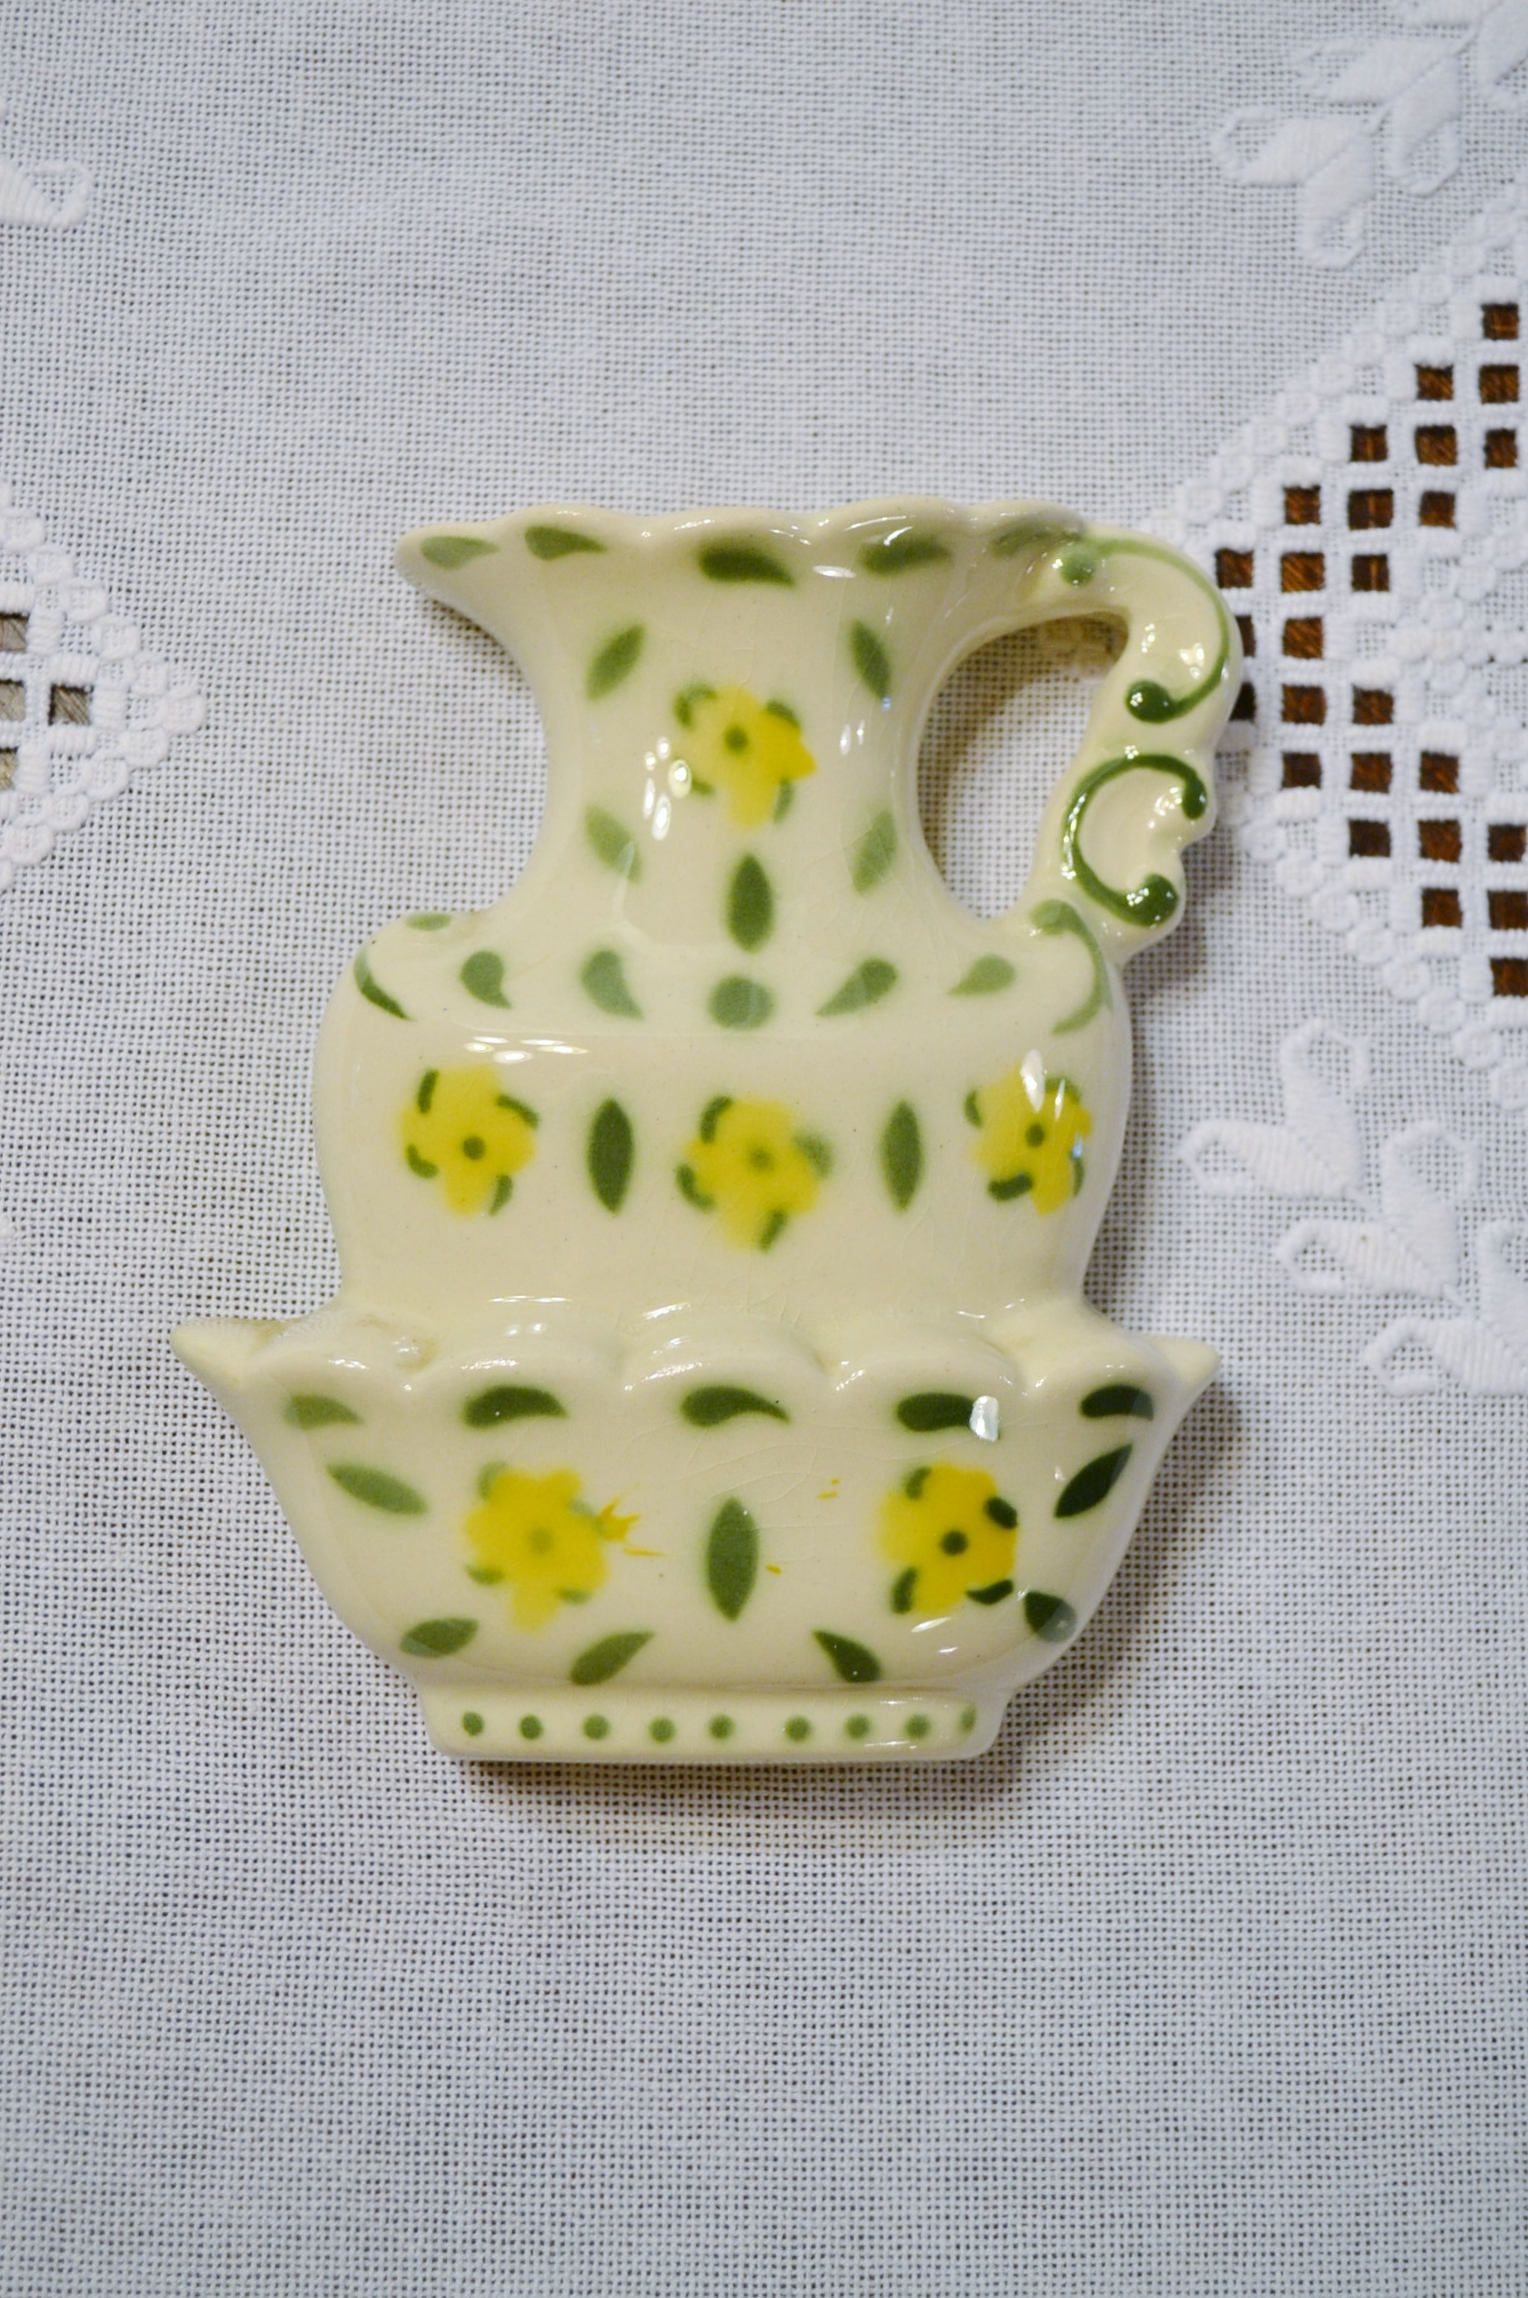 20 Recommended Pink and White Ceramic Vase 2024 free download pink and white ceramic vase of vintage ceramic vase pink flowers 22k gold details white fade to inside vintage ceramic wall pocket hanging vase planter pitcher and bowl yellow green floral p